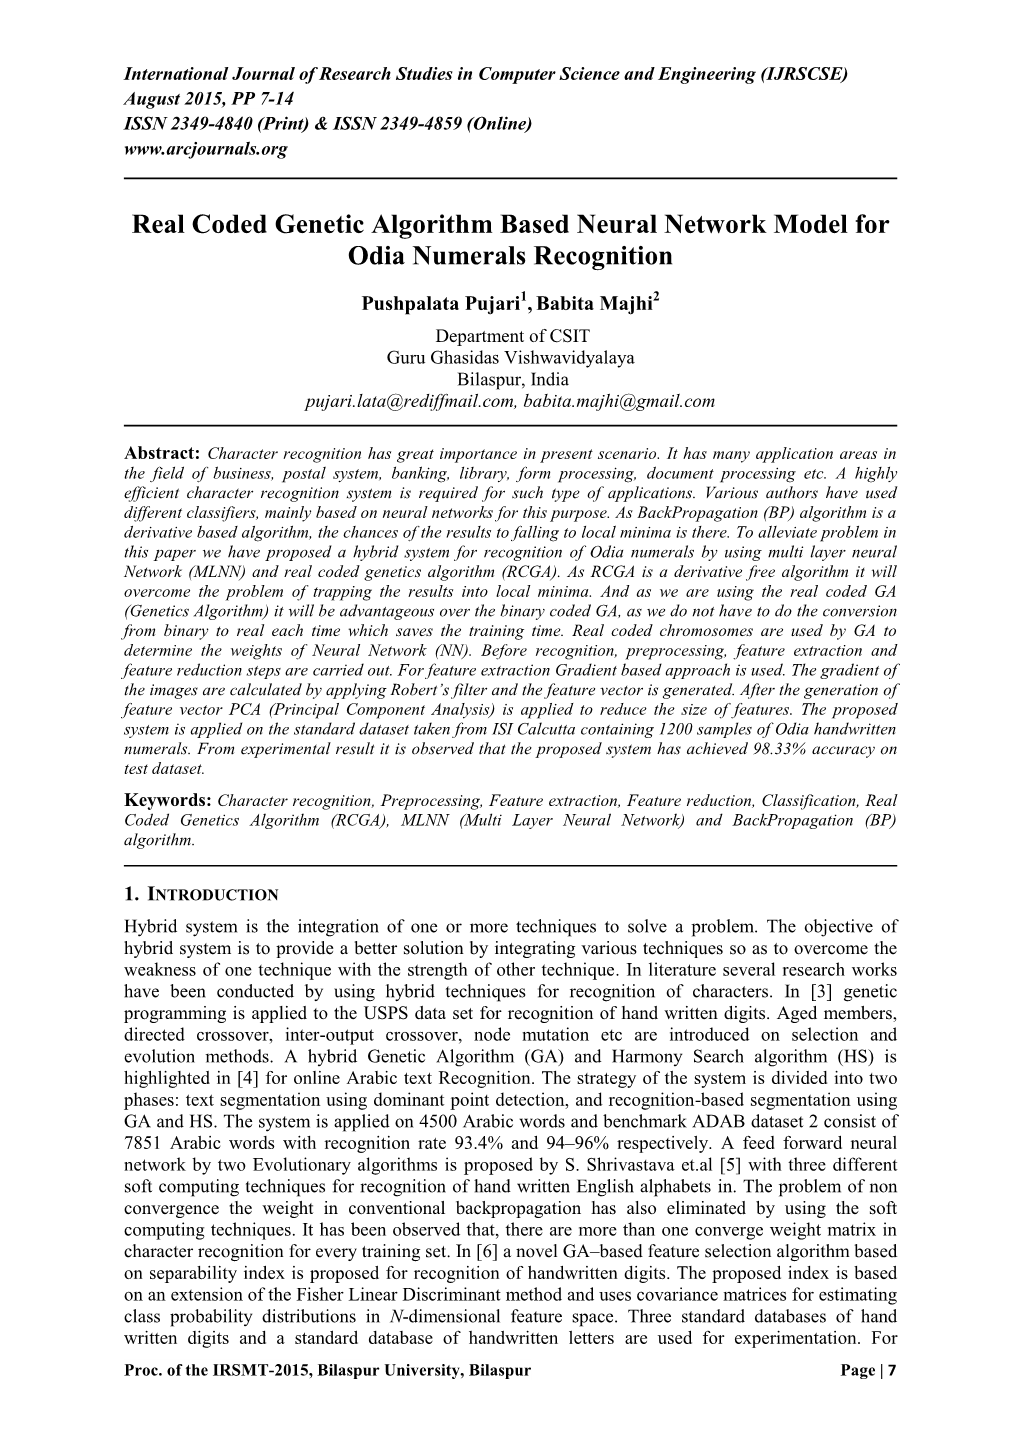 Real Coded Genetic Algorithm Based Neural Network Model for Odia Numerals Recognition